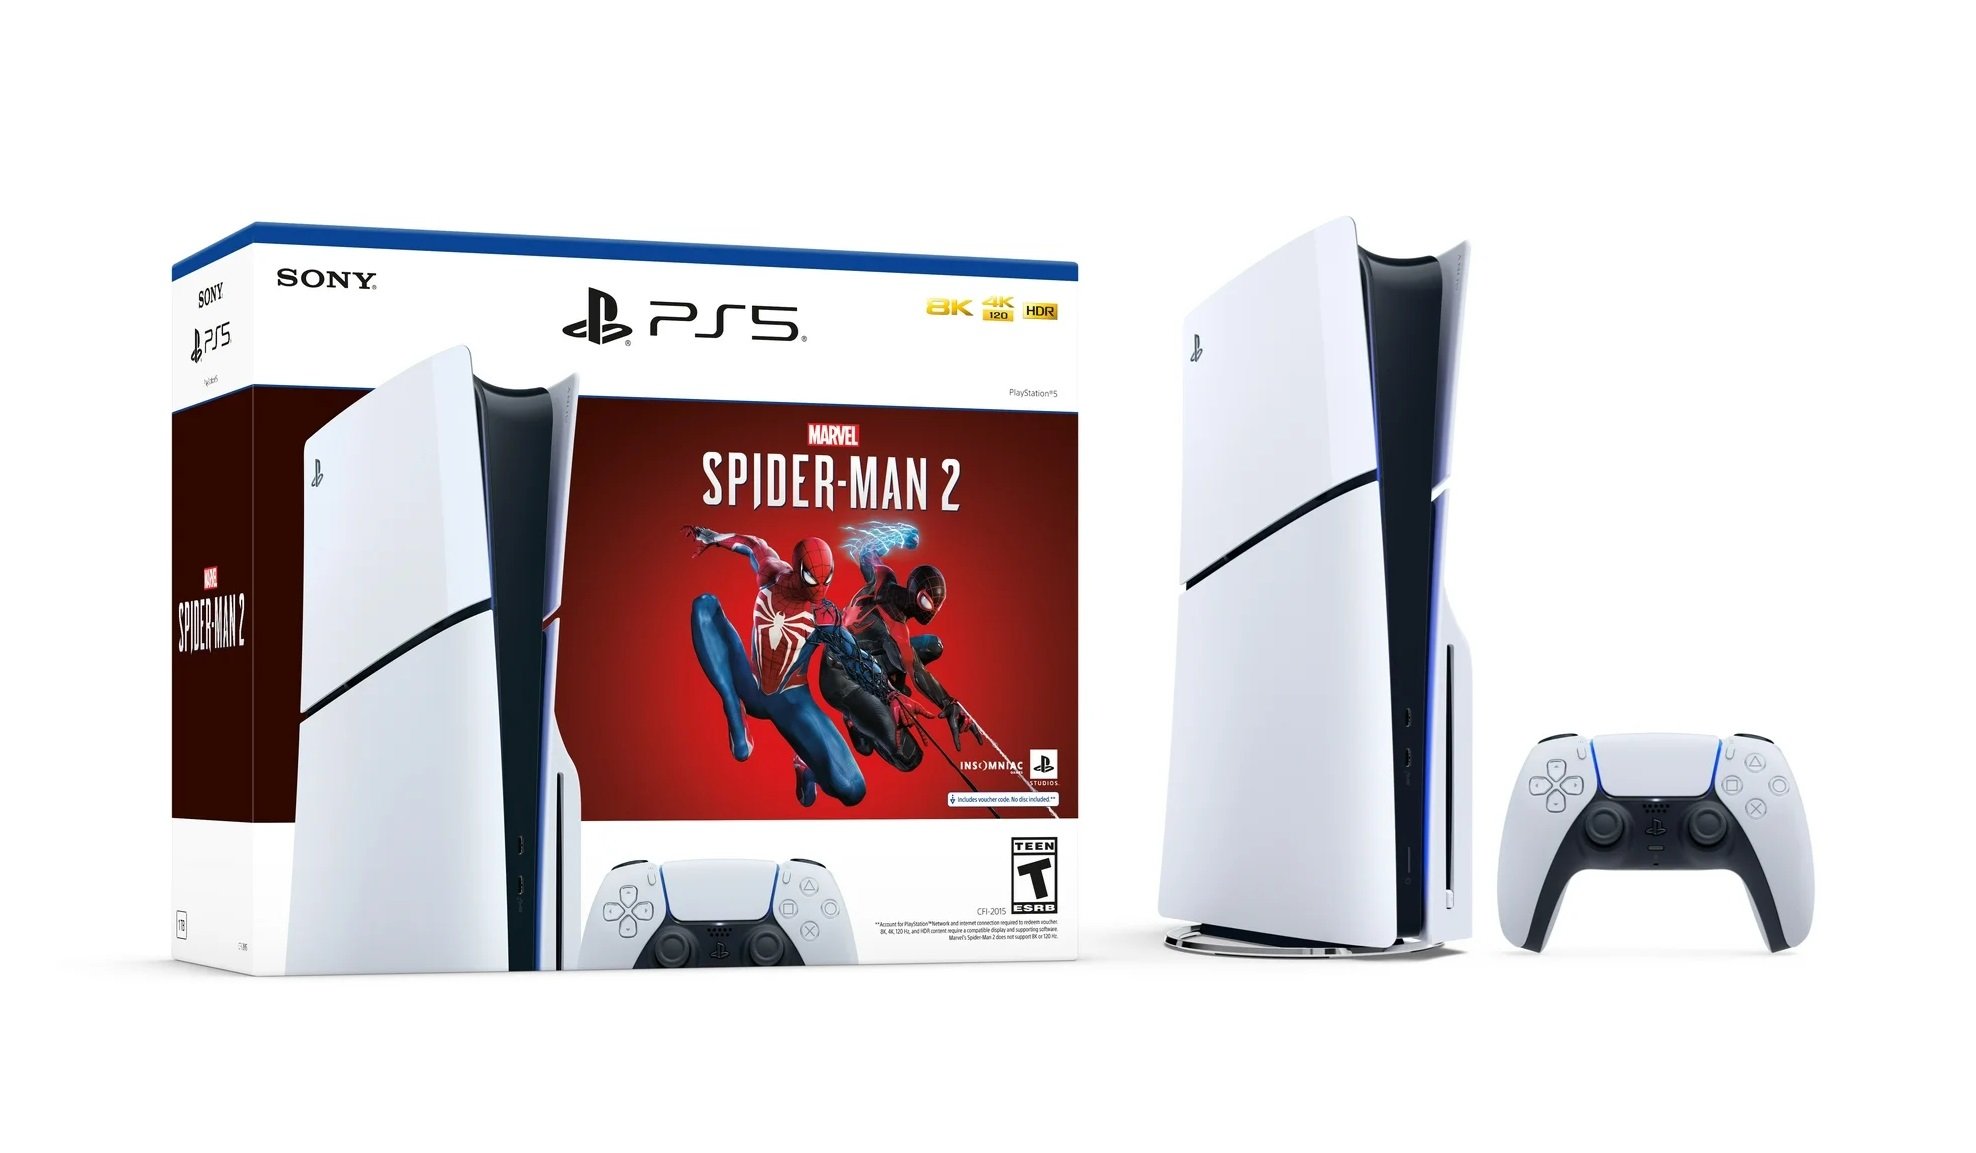 The PlayStation 5 Slim Spider-Man 2 Console Bundle Is Now Available at Dell